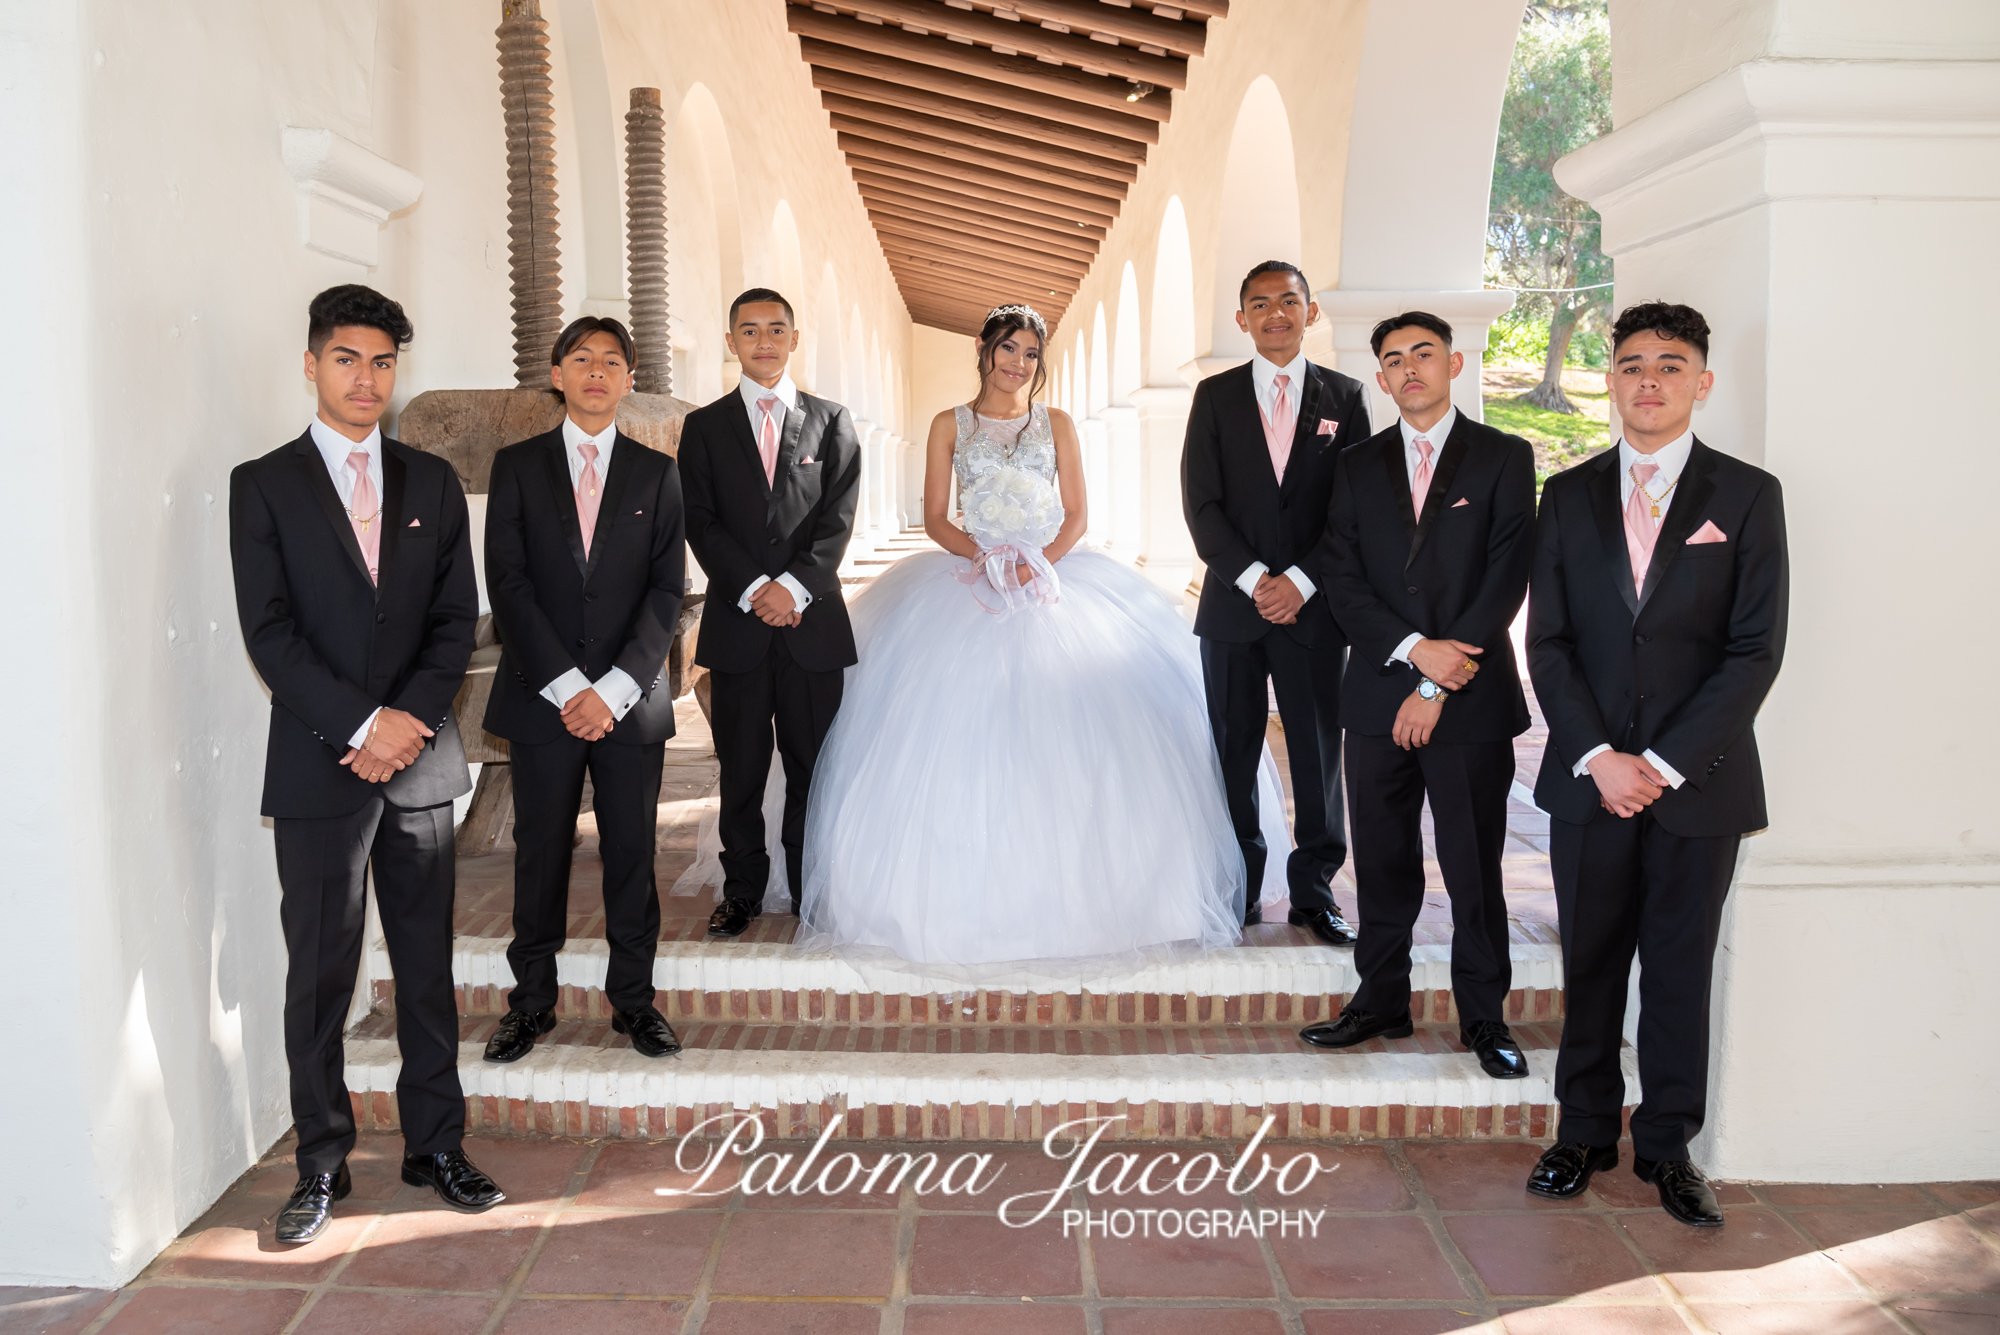 Quinceanera photo shoot with Chambelanes by Paloma Jacobo Photography